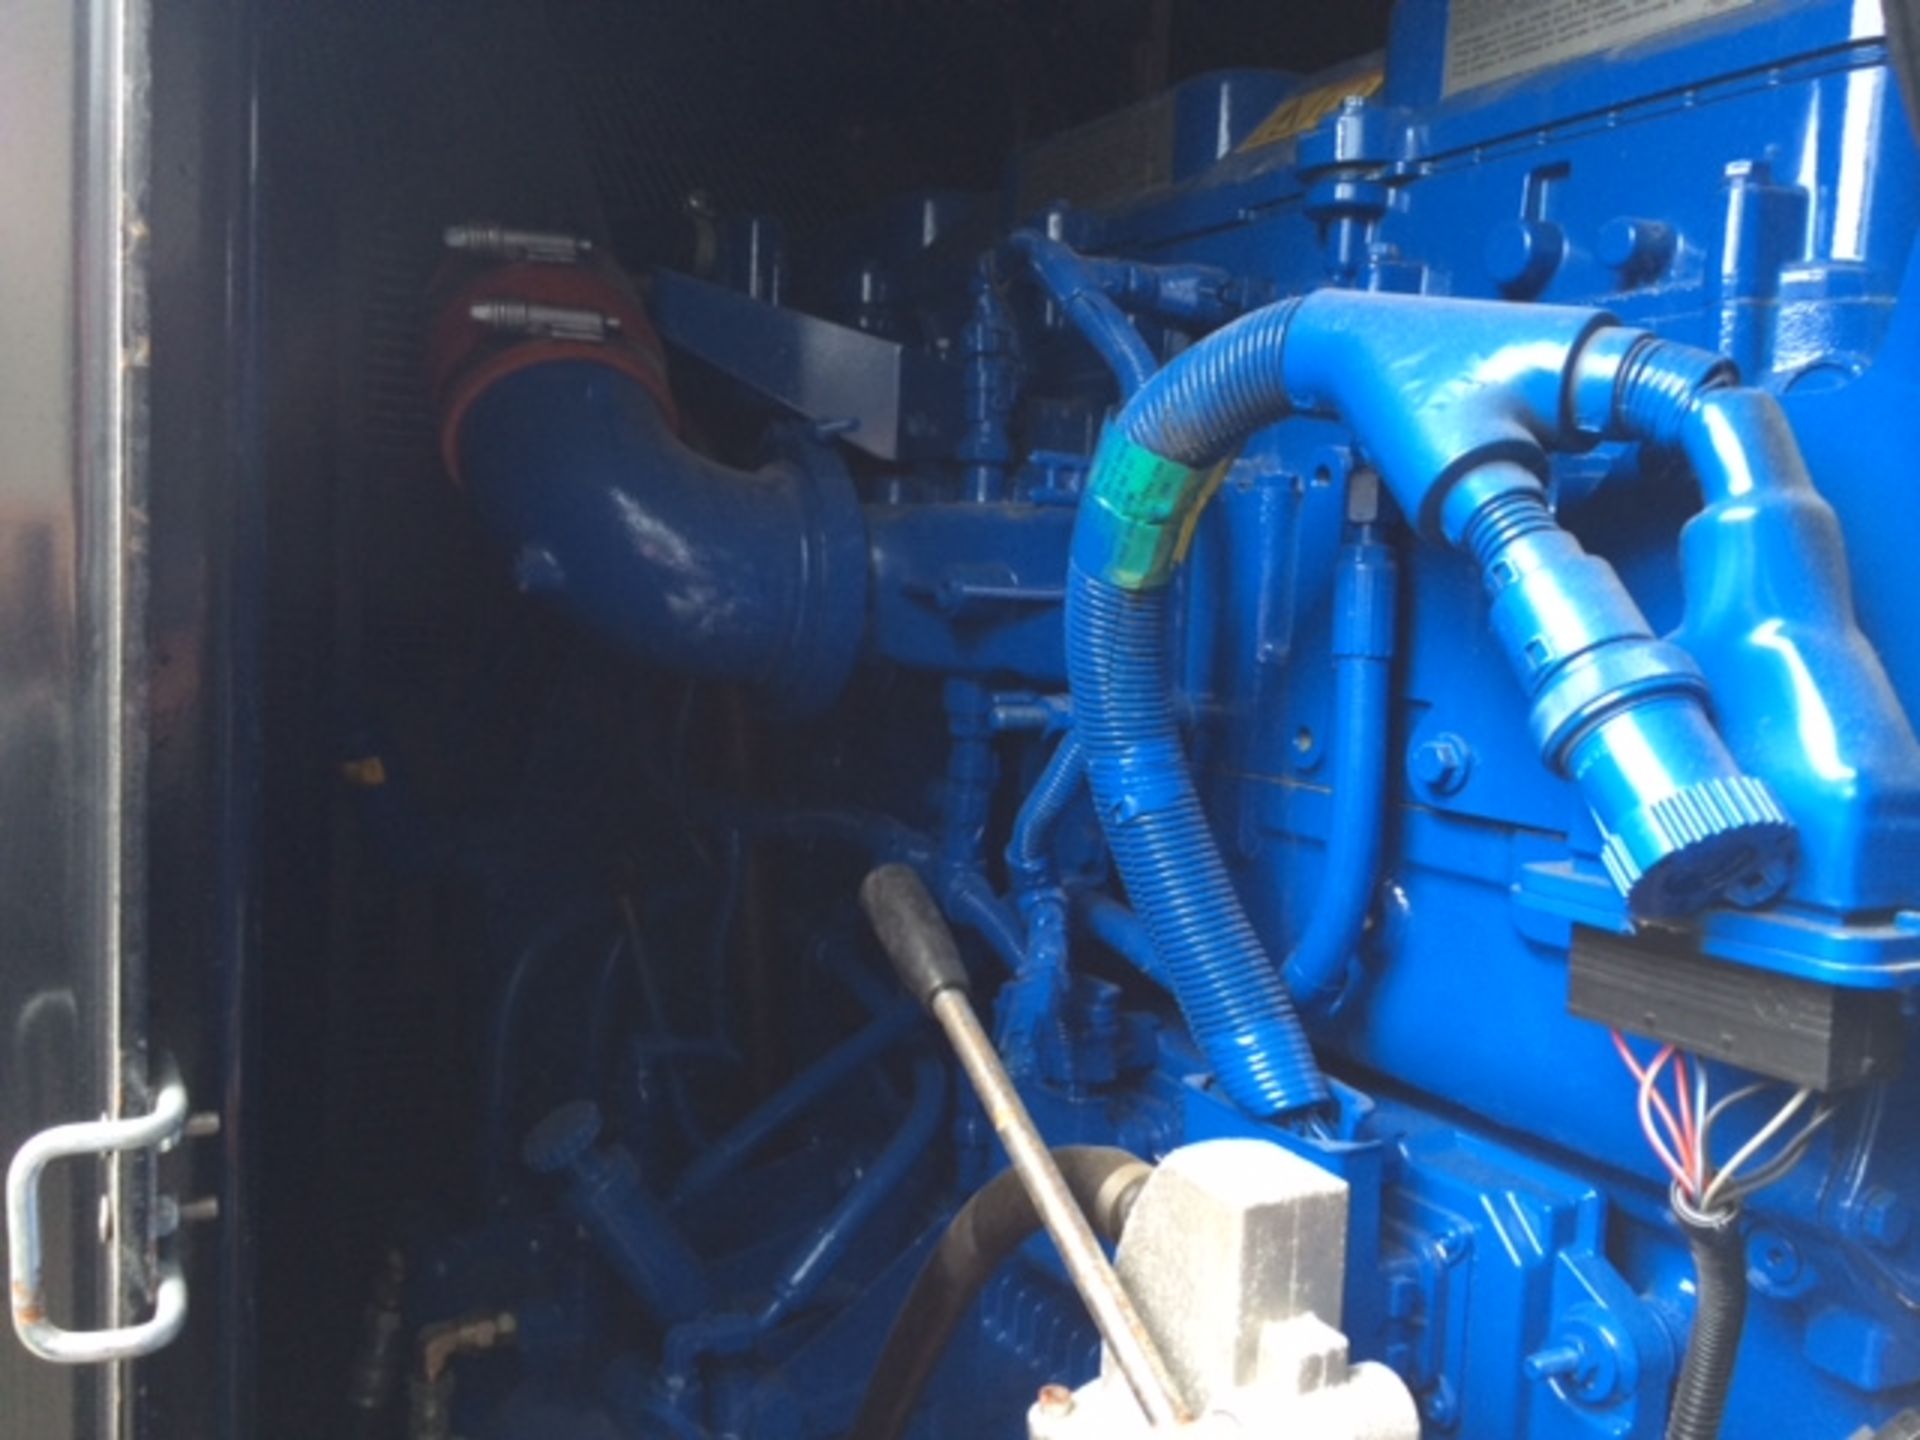 Genset Generator. 350 KVA. The generator has done 336hrs and is a Perkins engine - Bild 6 aus 10